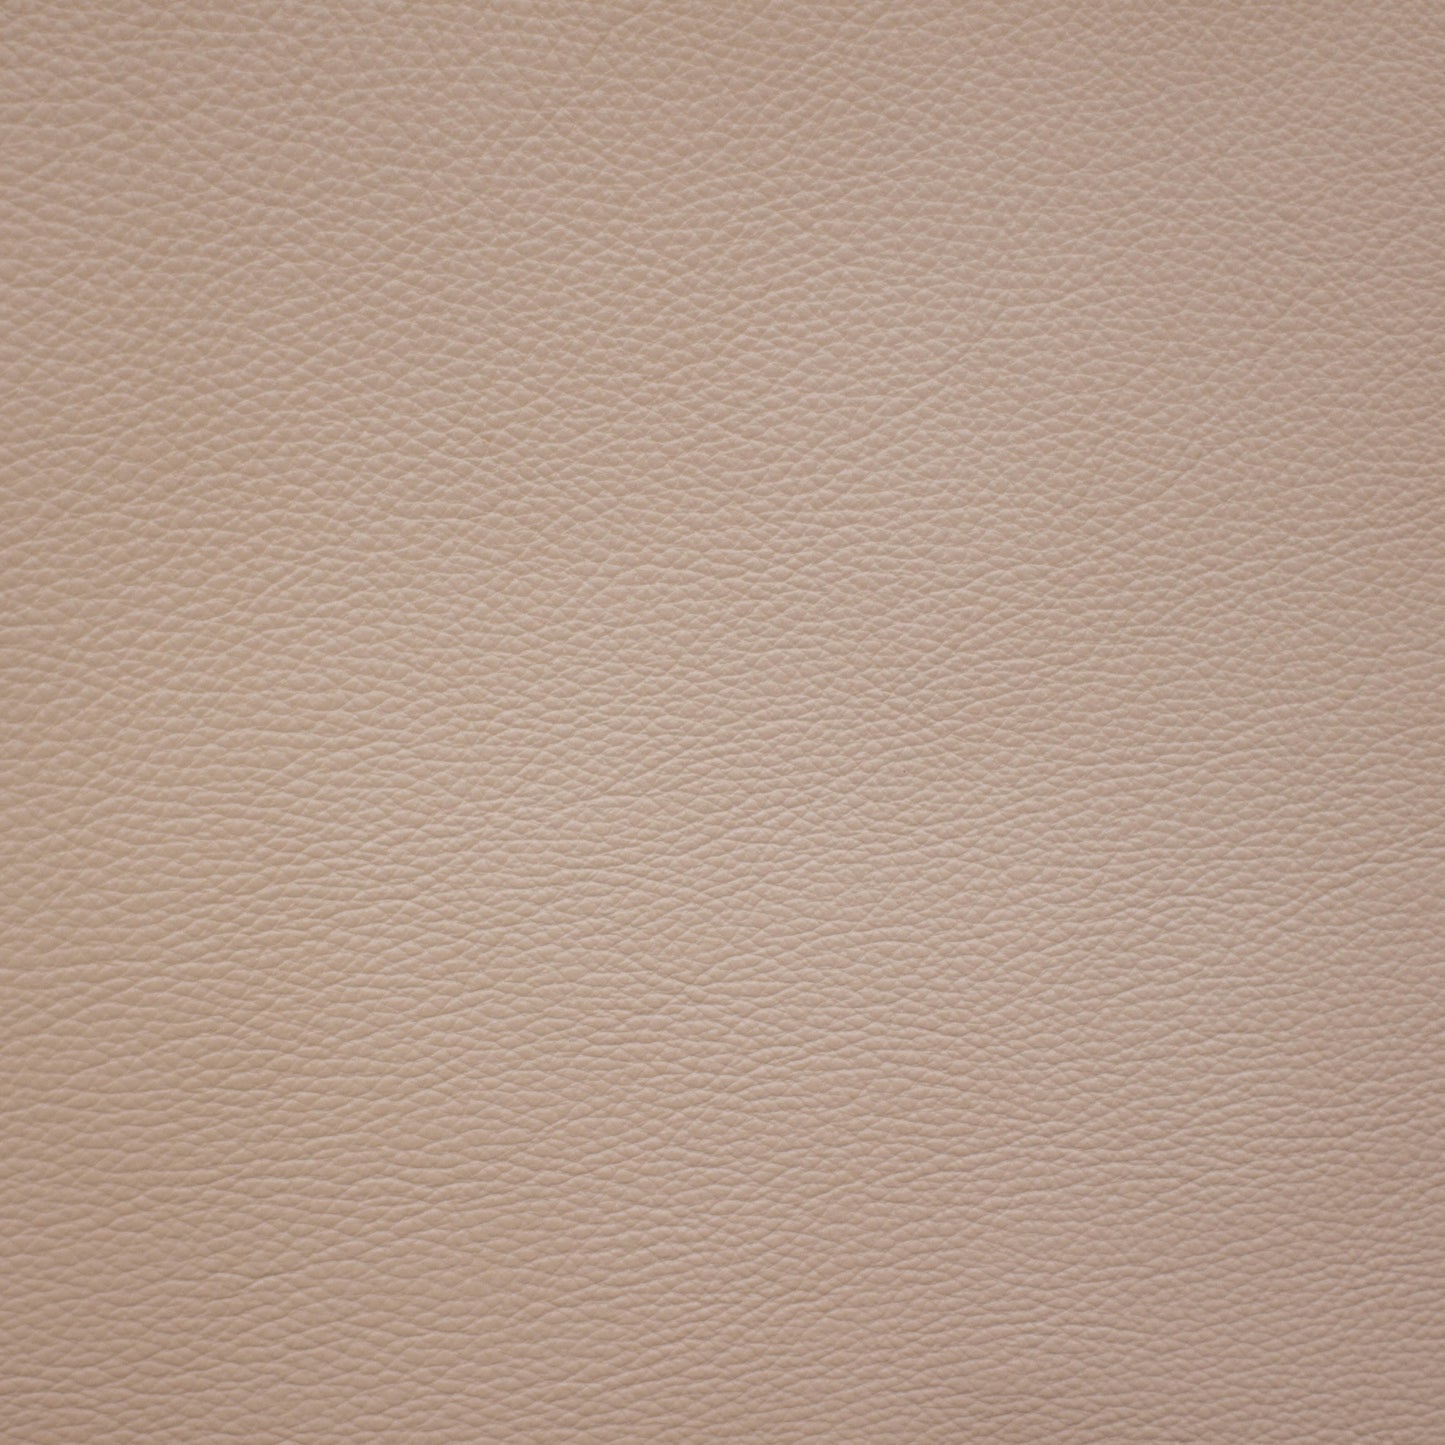 Urbane, Cream, Spilltop® Water Resistance, Hospitality Leather Hide